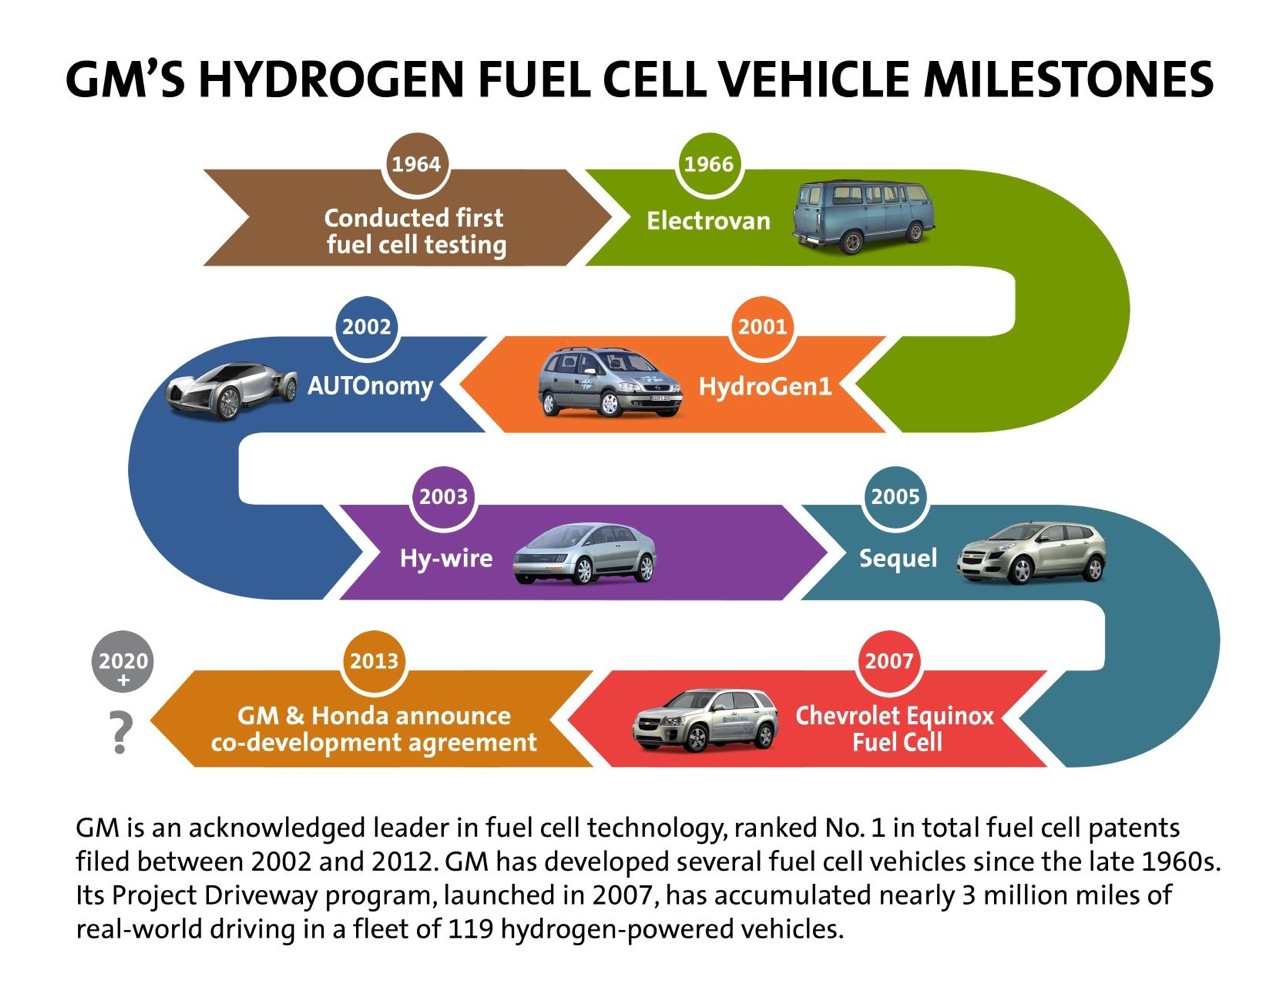 GM and Honda to codevelop hydrogen fuel cell technologies